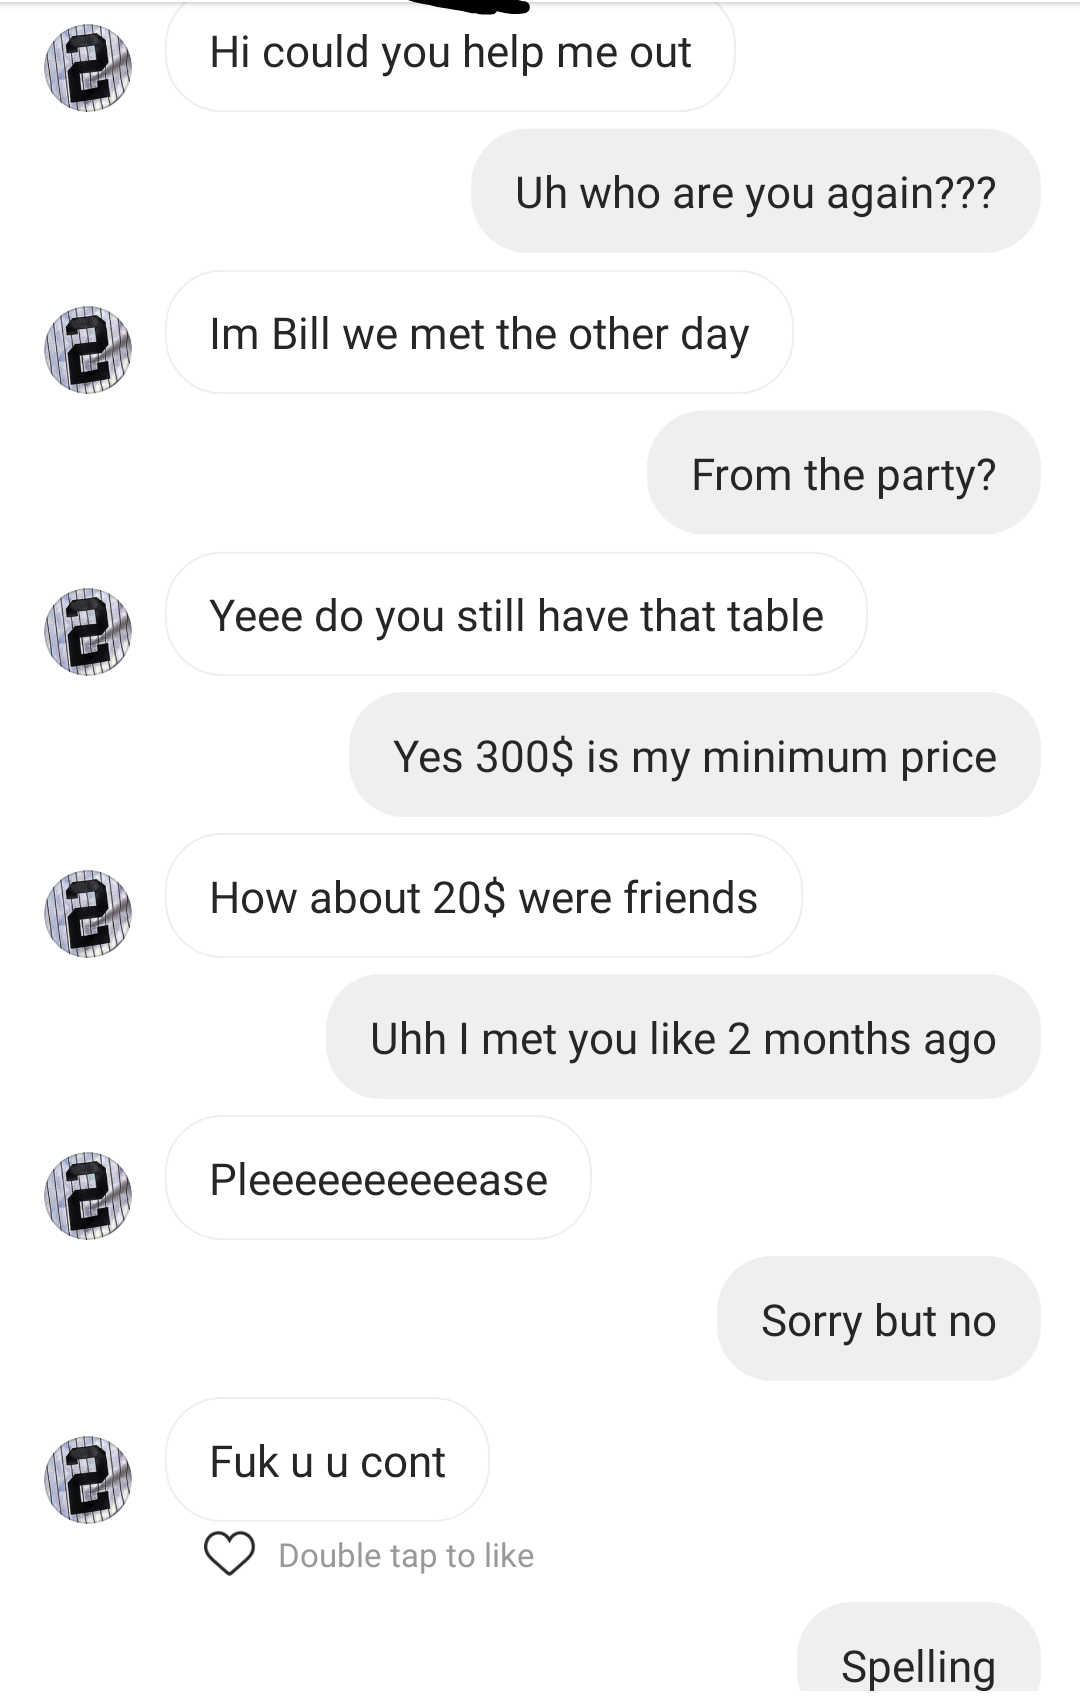 number - Hi could you help me out Uh who are you again??? 2 Im Bill we met the other day From the party? 2 Yeee do you still have that table Yes 300$ is my minimum price Ten How about 20$ were friends Uhh I met you 2 months ago Pleeeeeeeeeease 2 Sorry but